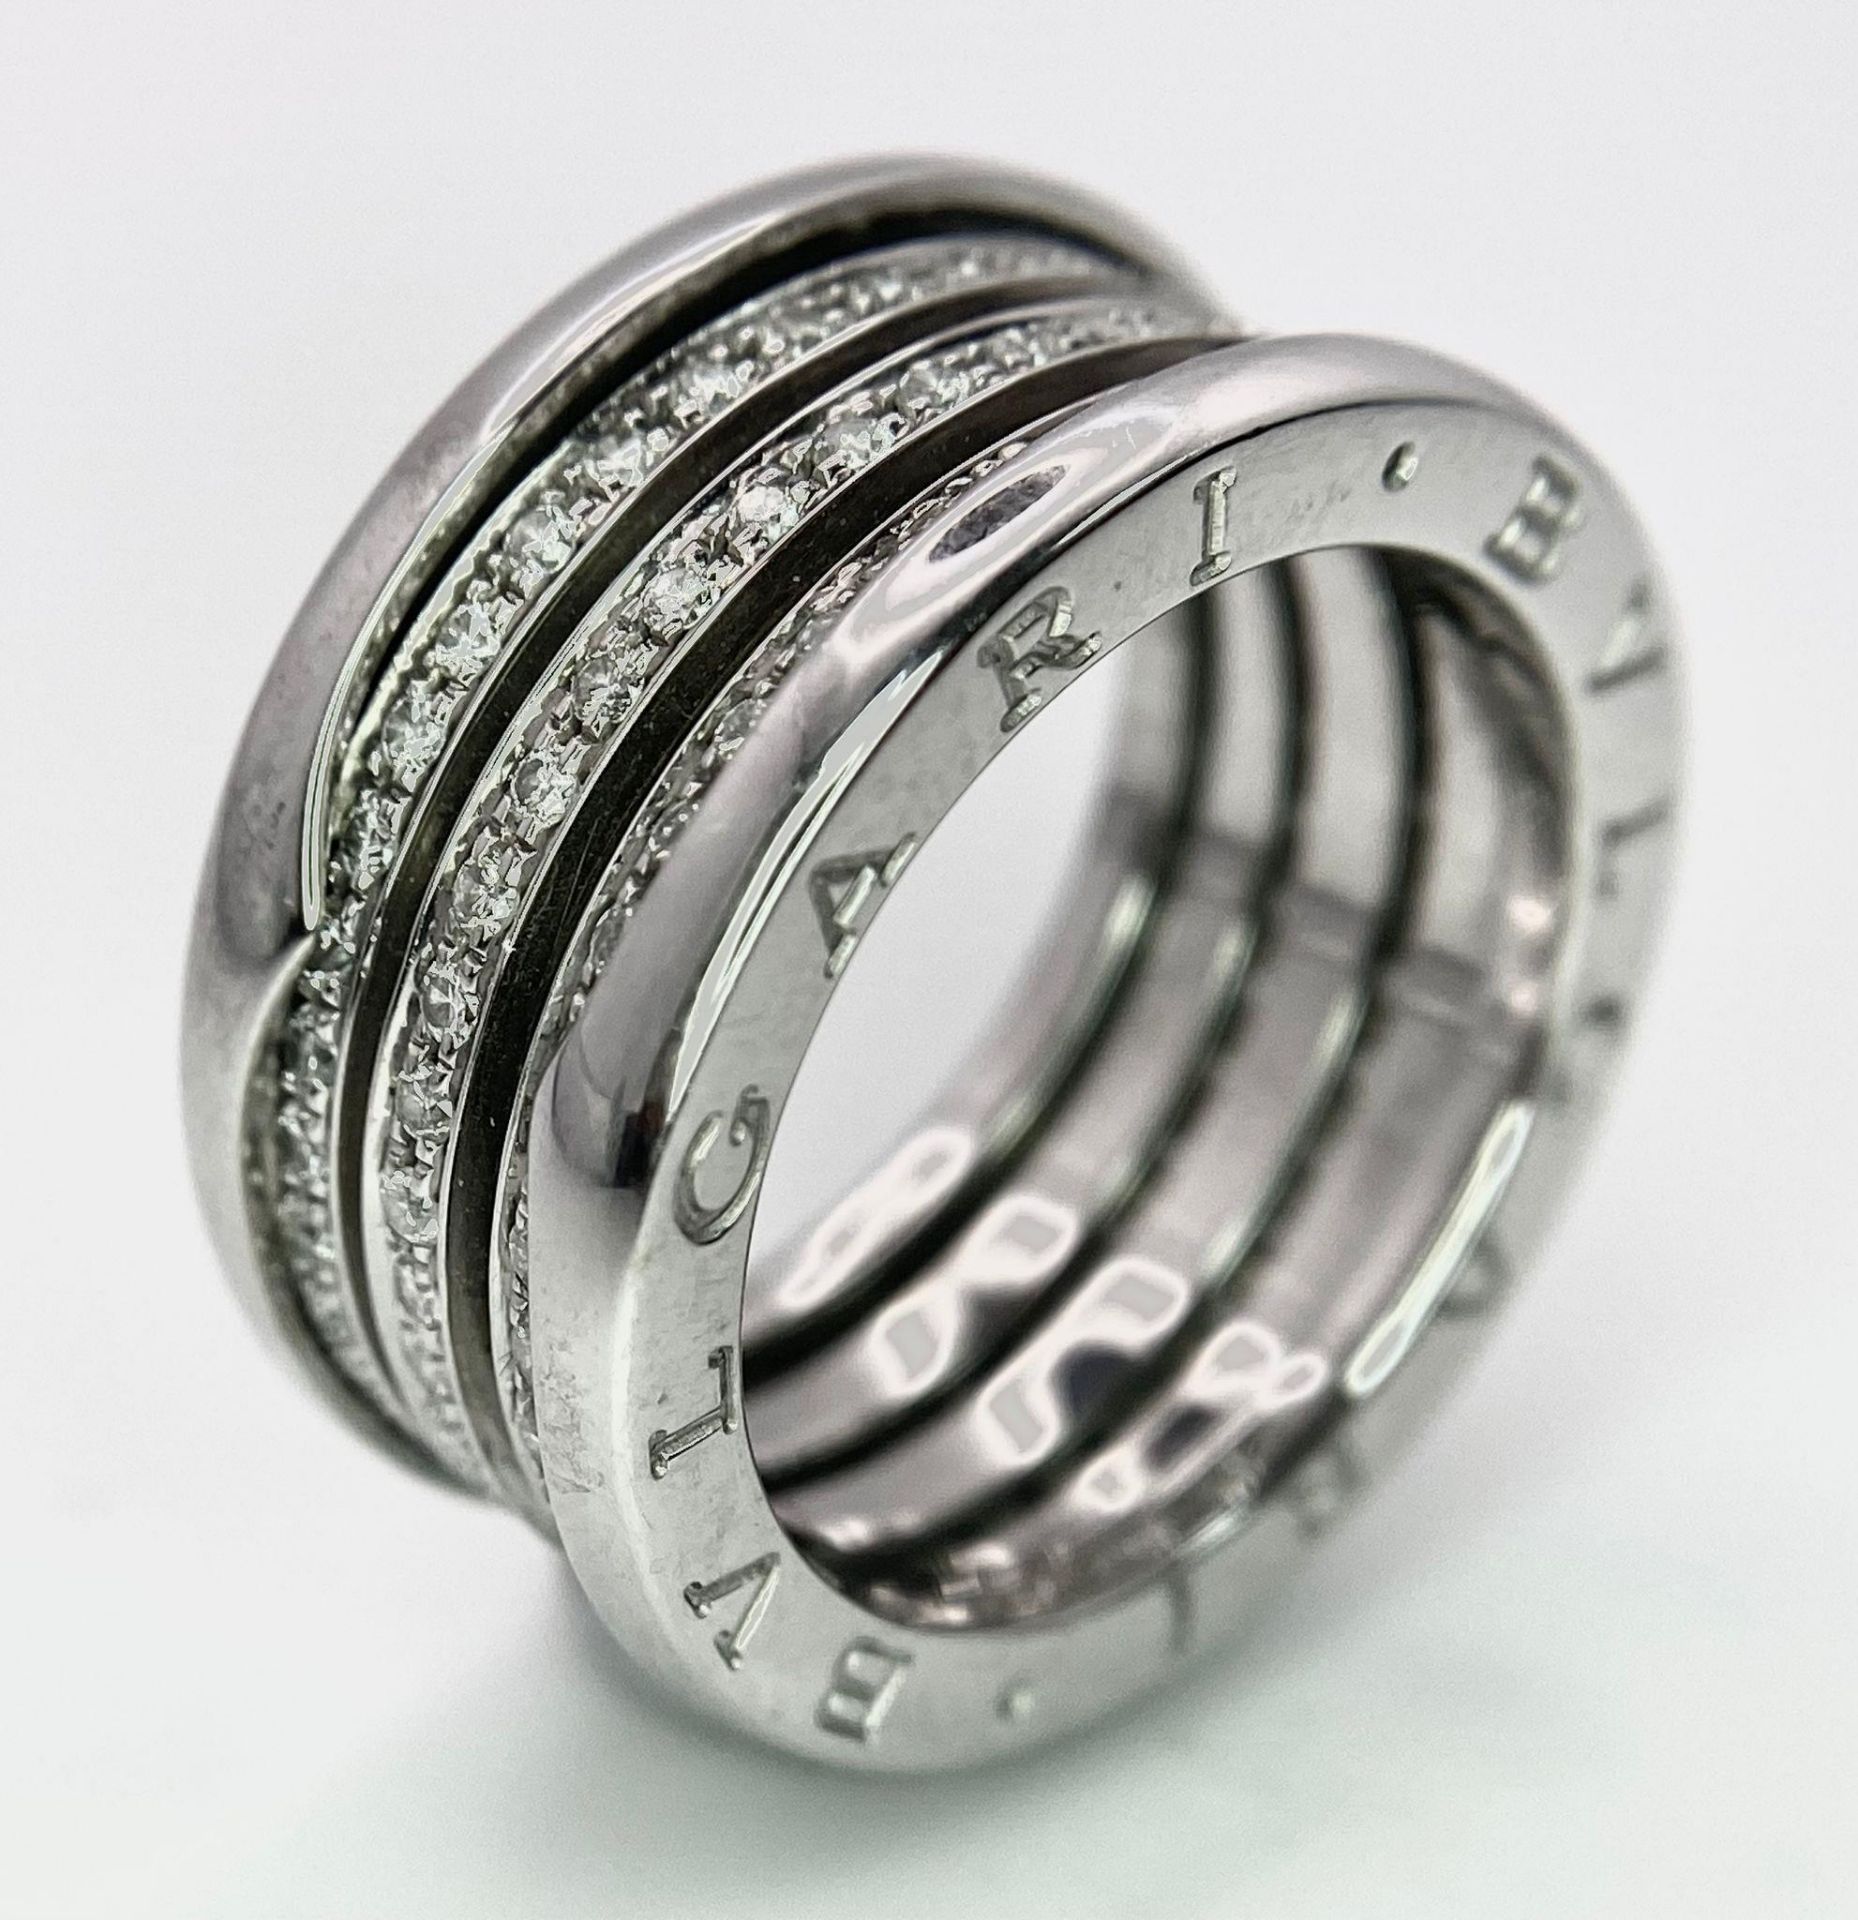 A Beautiful Bulgari 3 Row Expandable Bandeau Ring In 18k White Gold and Diamonds, Band Width 10mm,